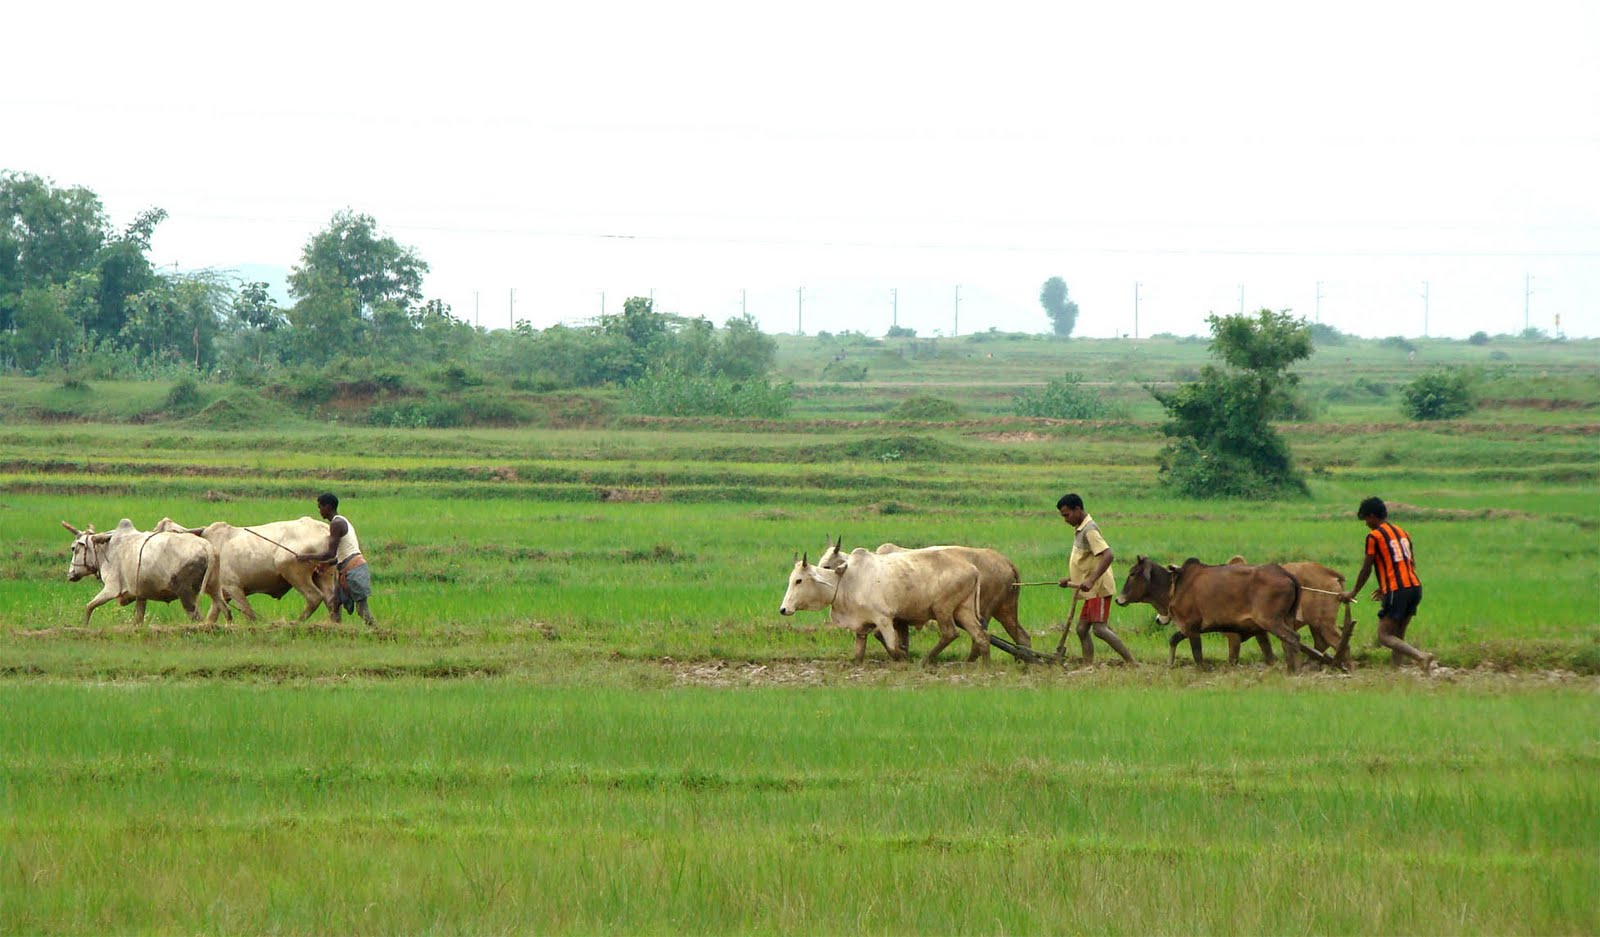 Odisha farmers to get Rs 1,776 cr in crop insurance